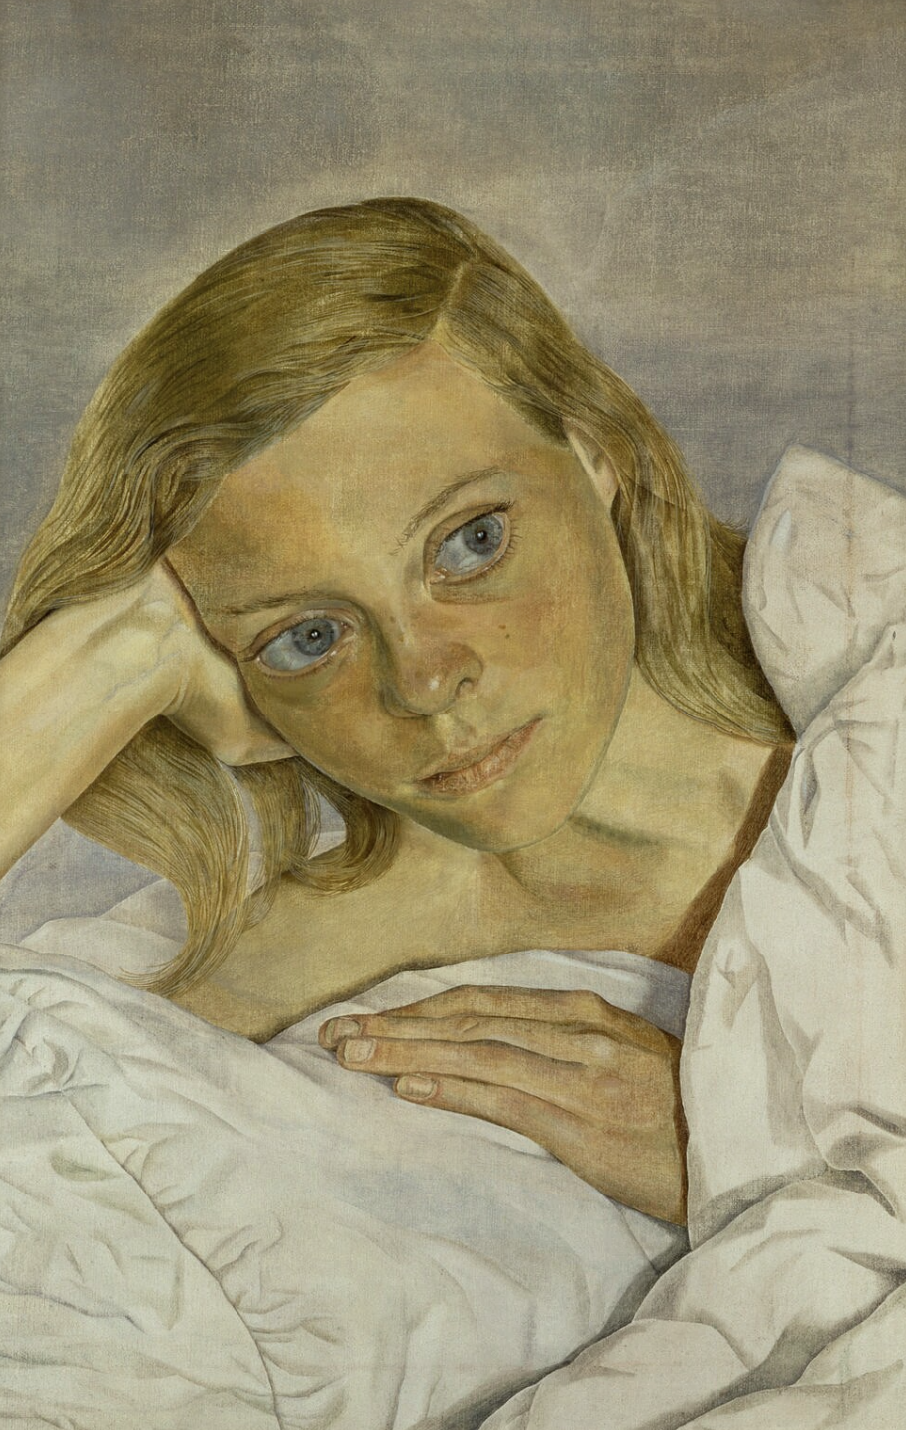 A portrait of a young blonde woman in bed